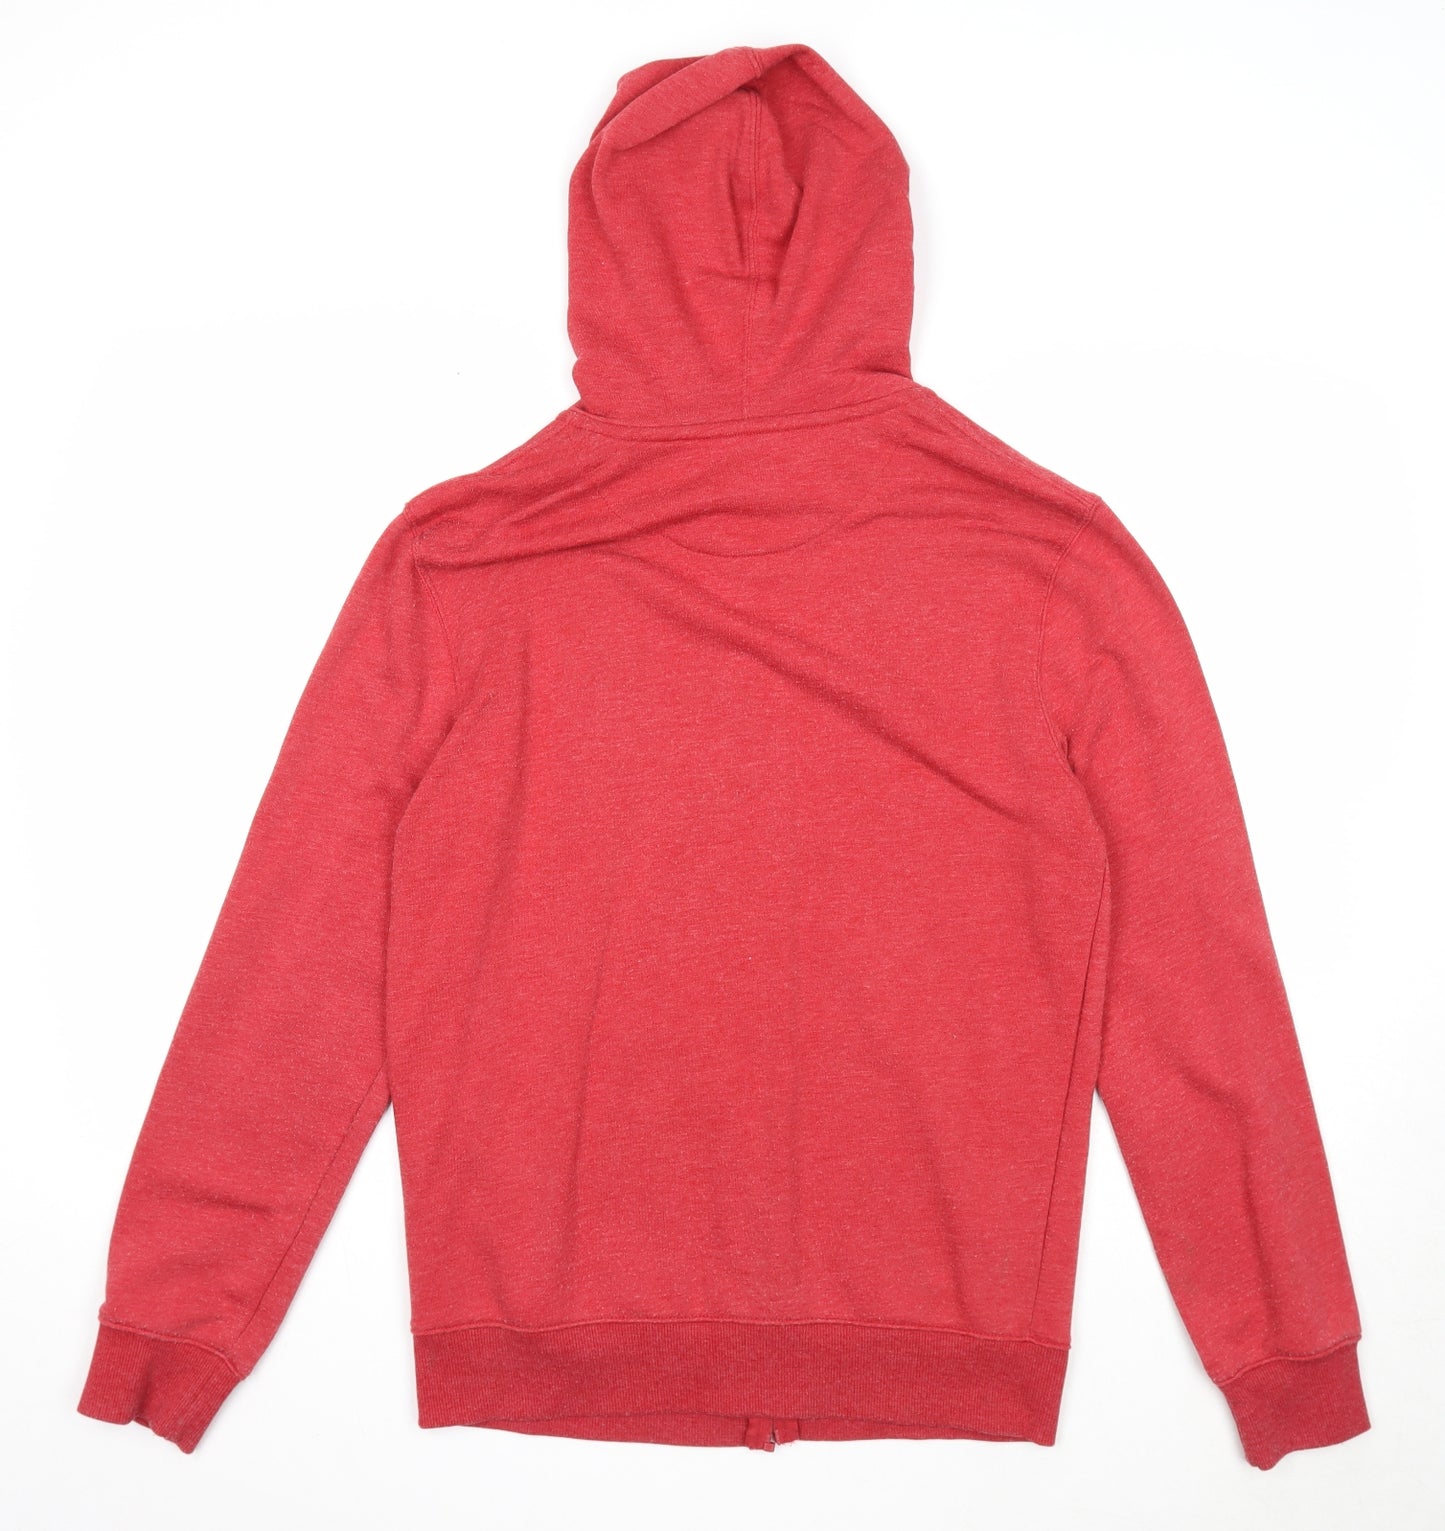 Easy Mens Red Cotton Full Zip Hoodie Size M